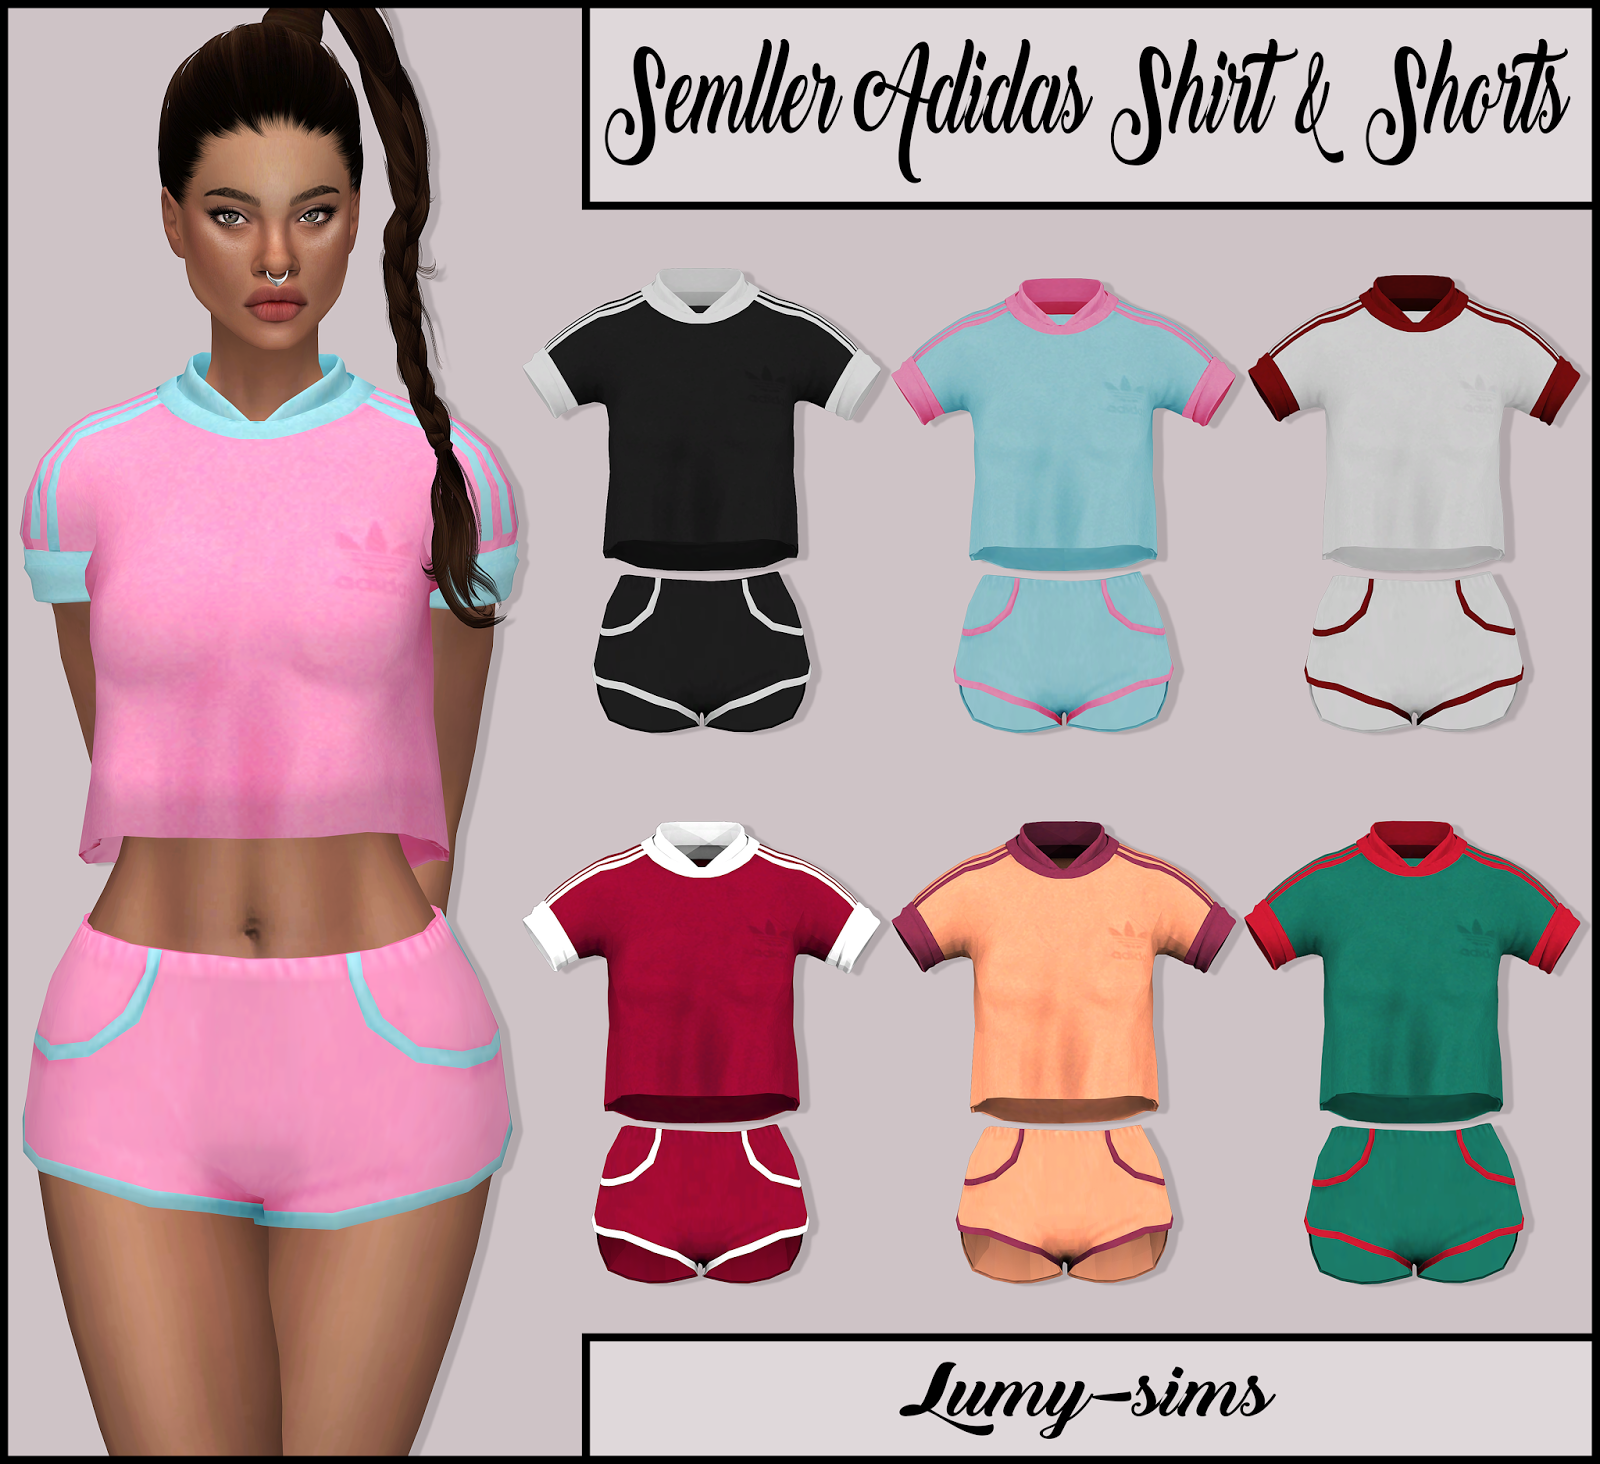 The Sims 4 Lumy Sims Semller